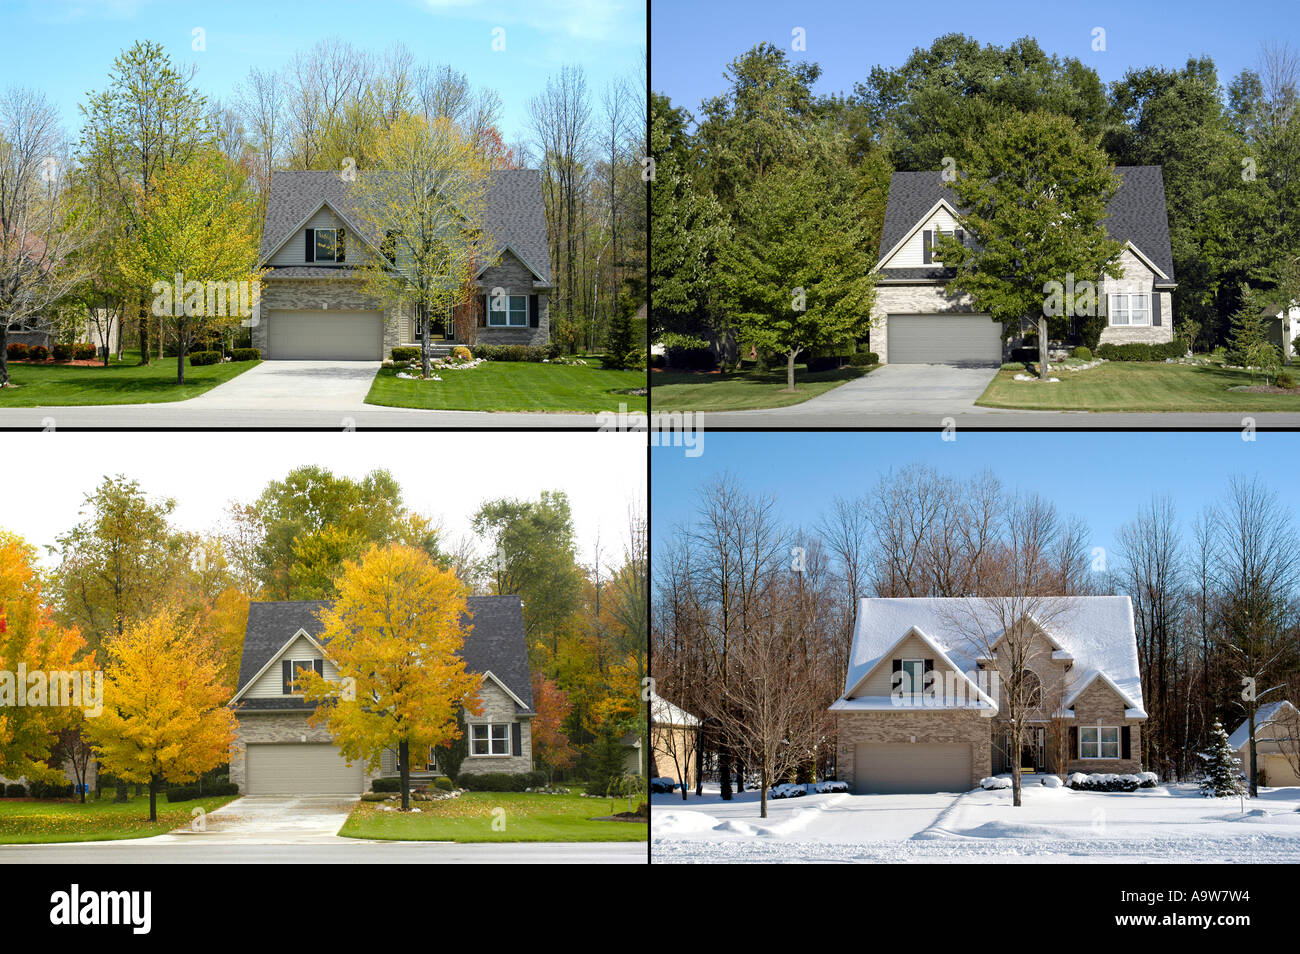 4 Seasons Images -  search DENNIS MACDONALD 4 CHANGING SEASONS for a COMPLETE larger selection of the individual images shown here Stock Photo